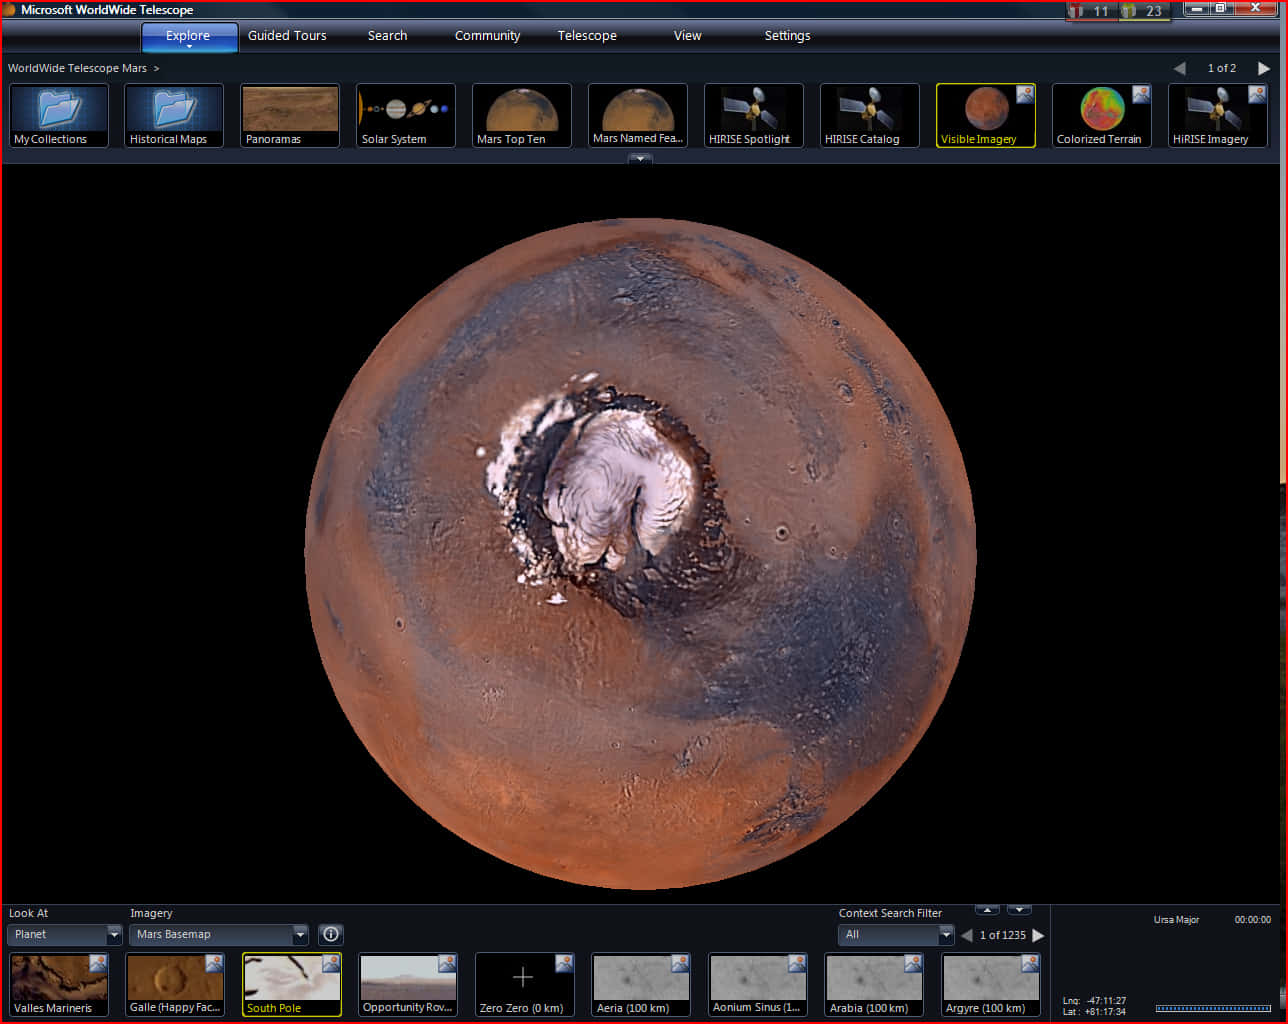 A stunning view of the Red Planet, Mars.